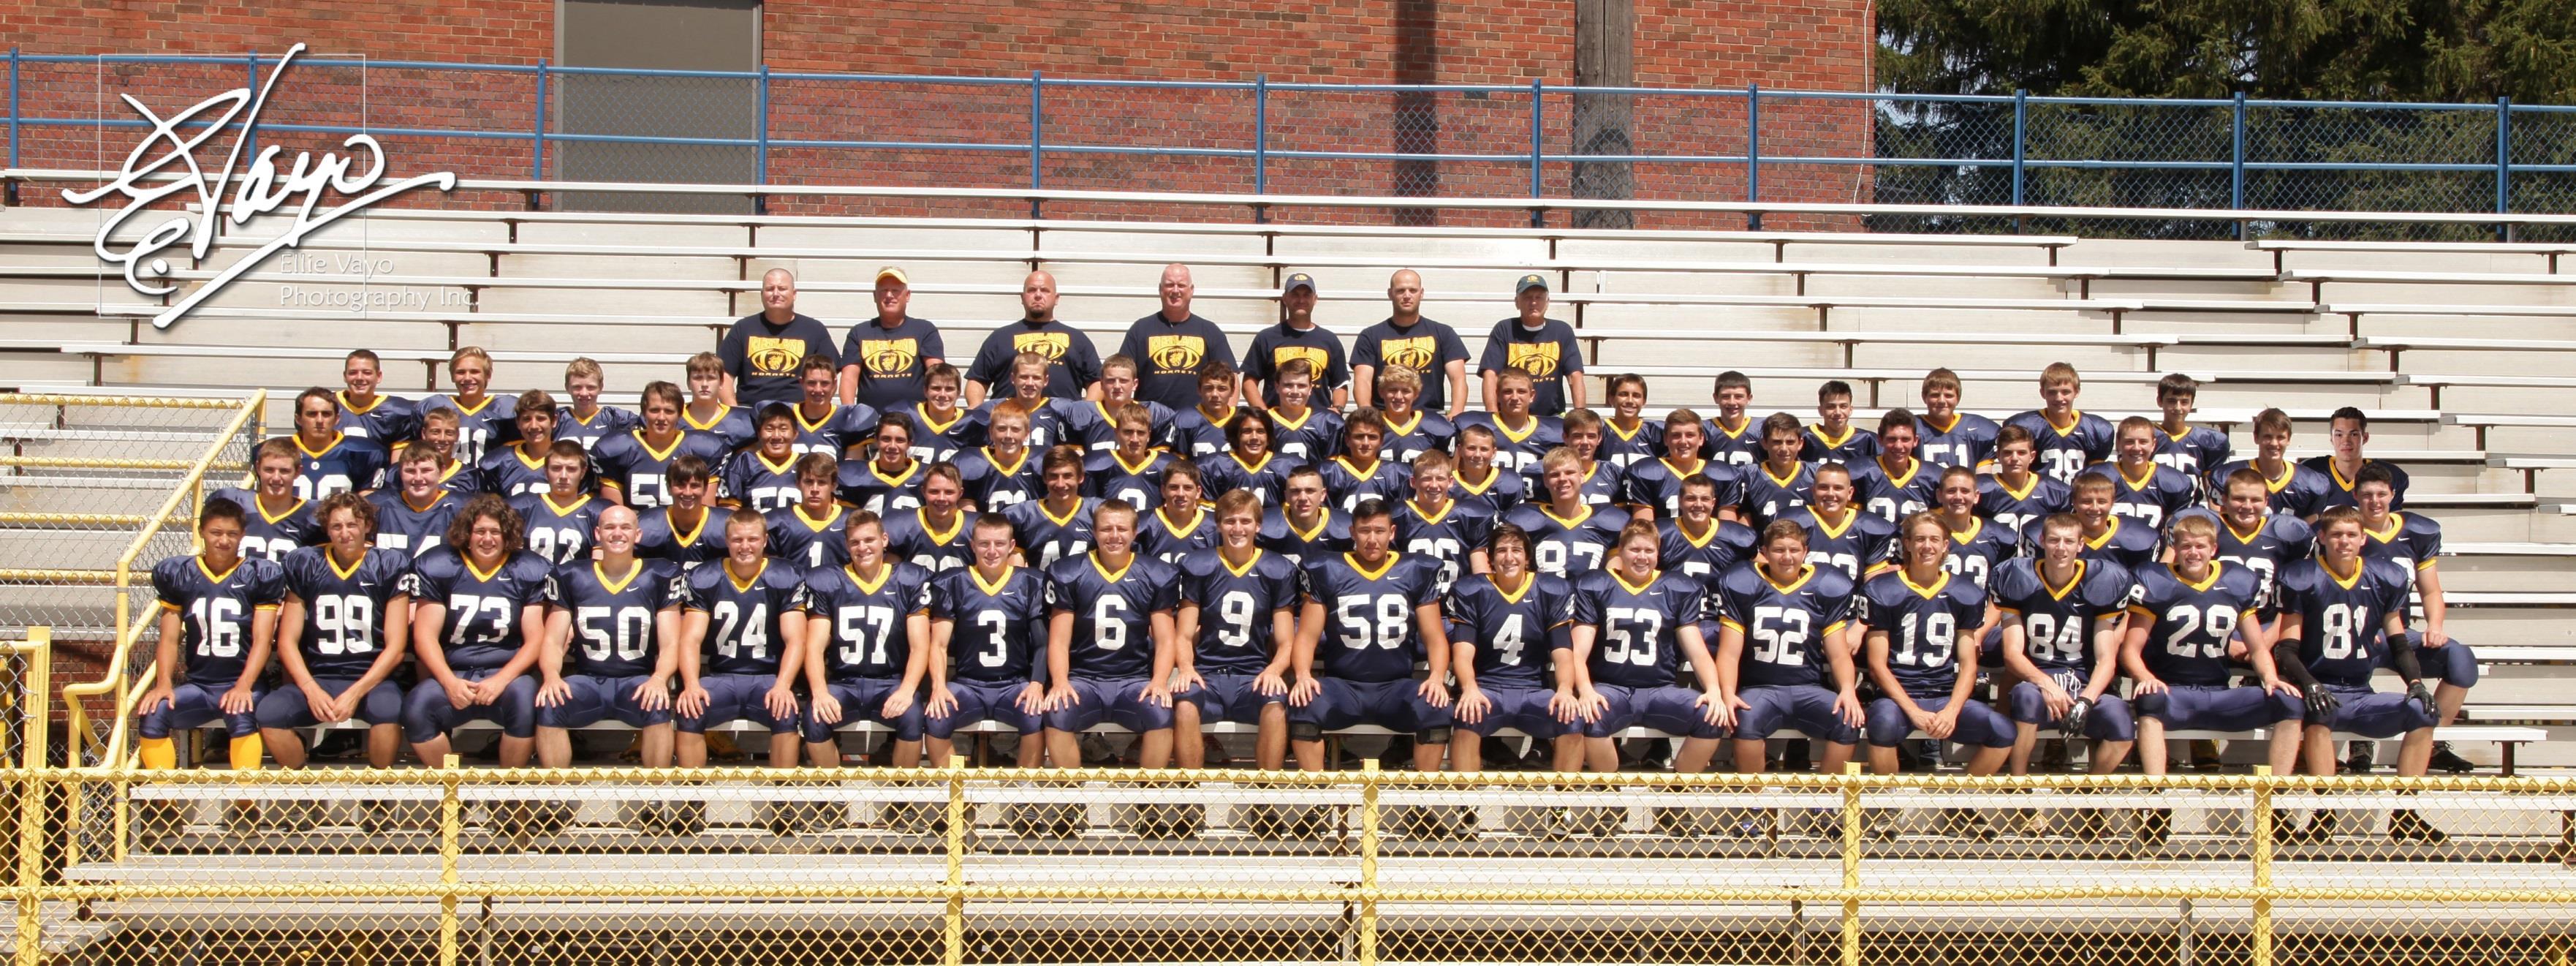 Football Kirtland ready for 5th straight state title game